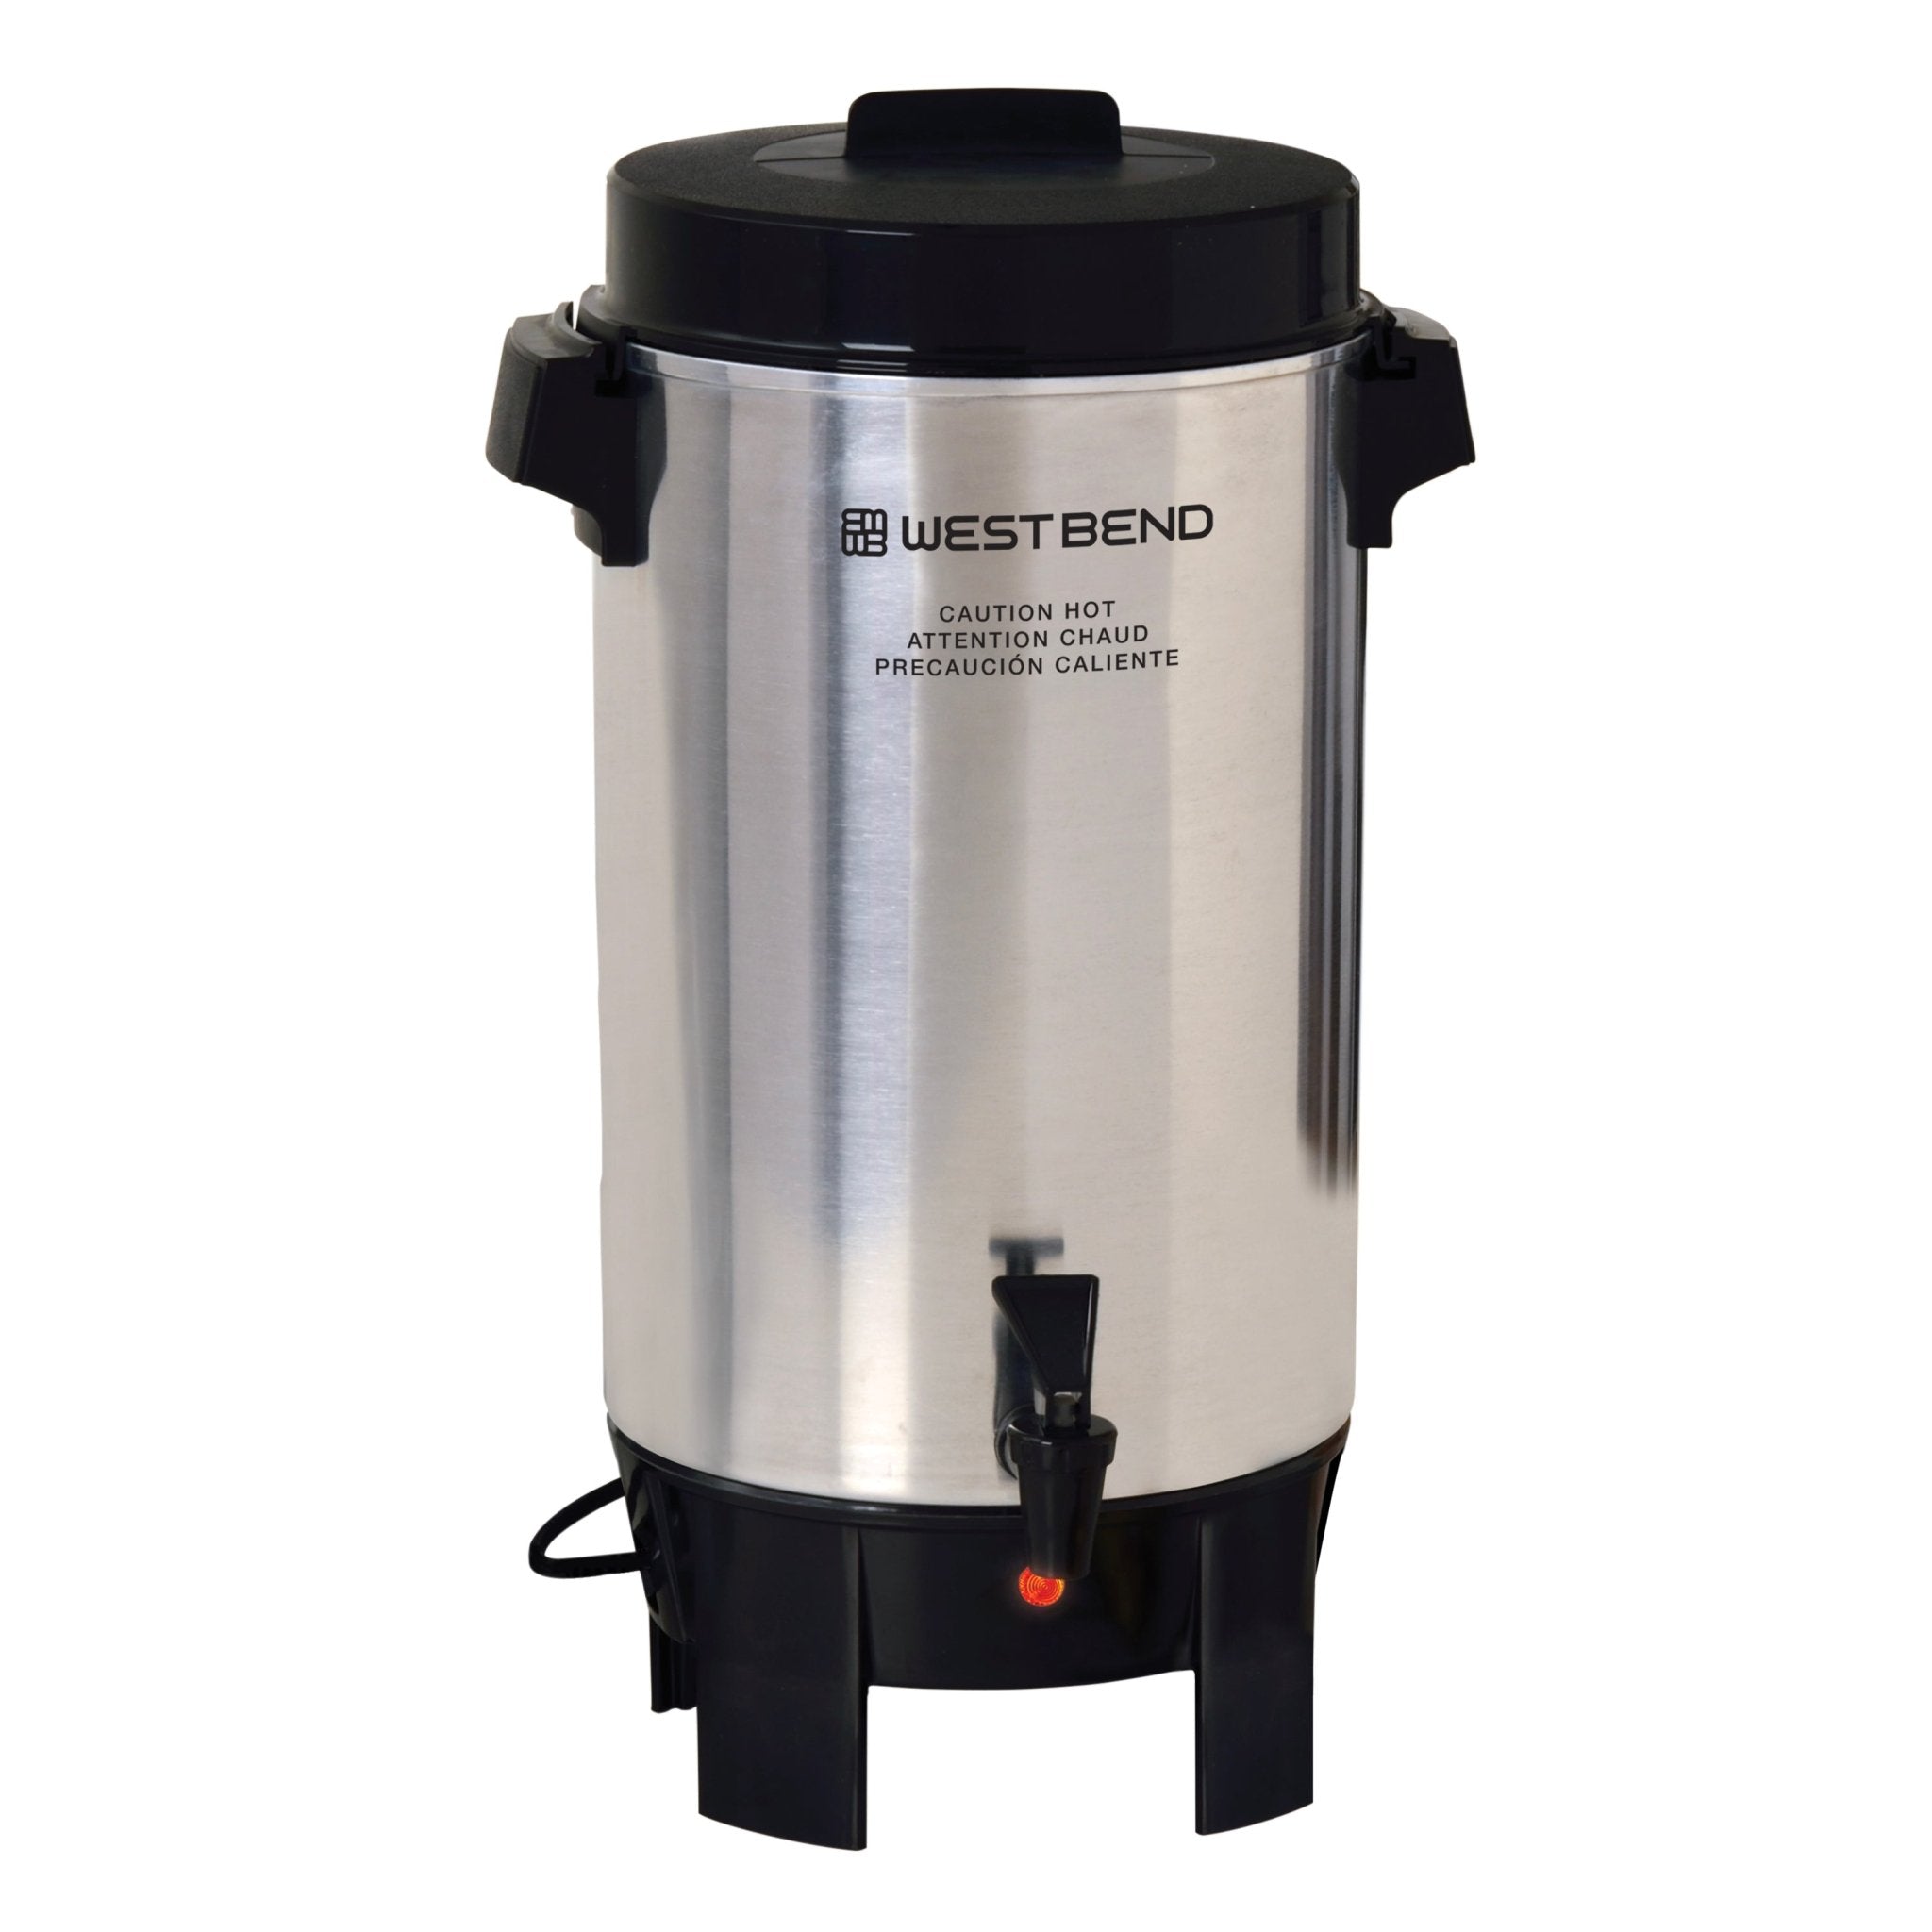 West Bend Polished Aluminum Coffee Urn, CU0042PA23, Silver, 42 Cup